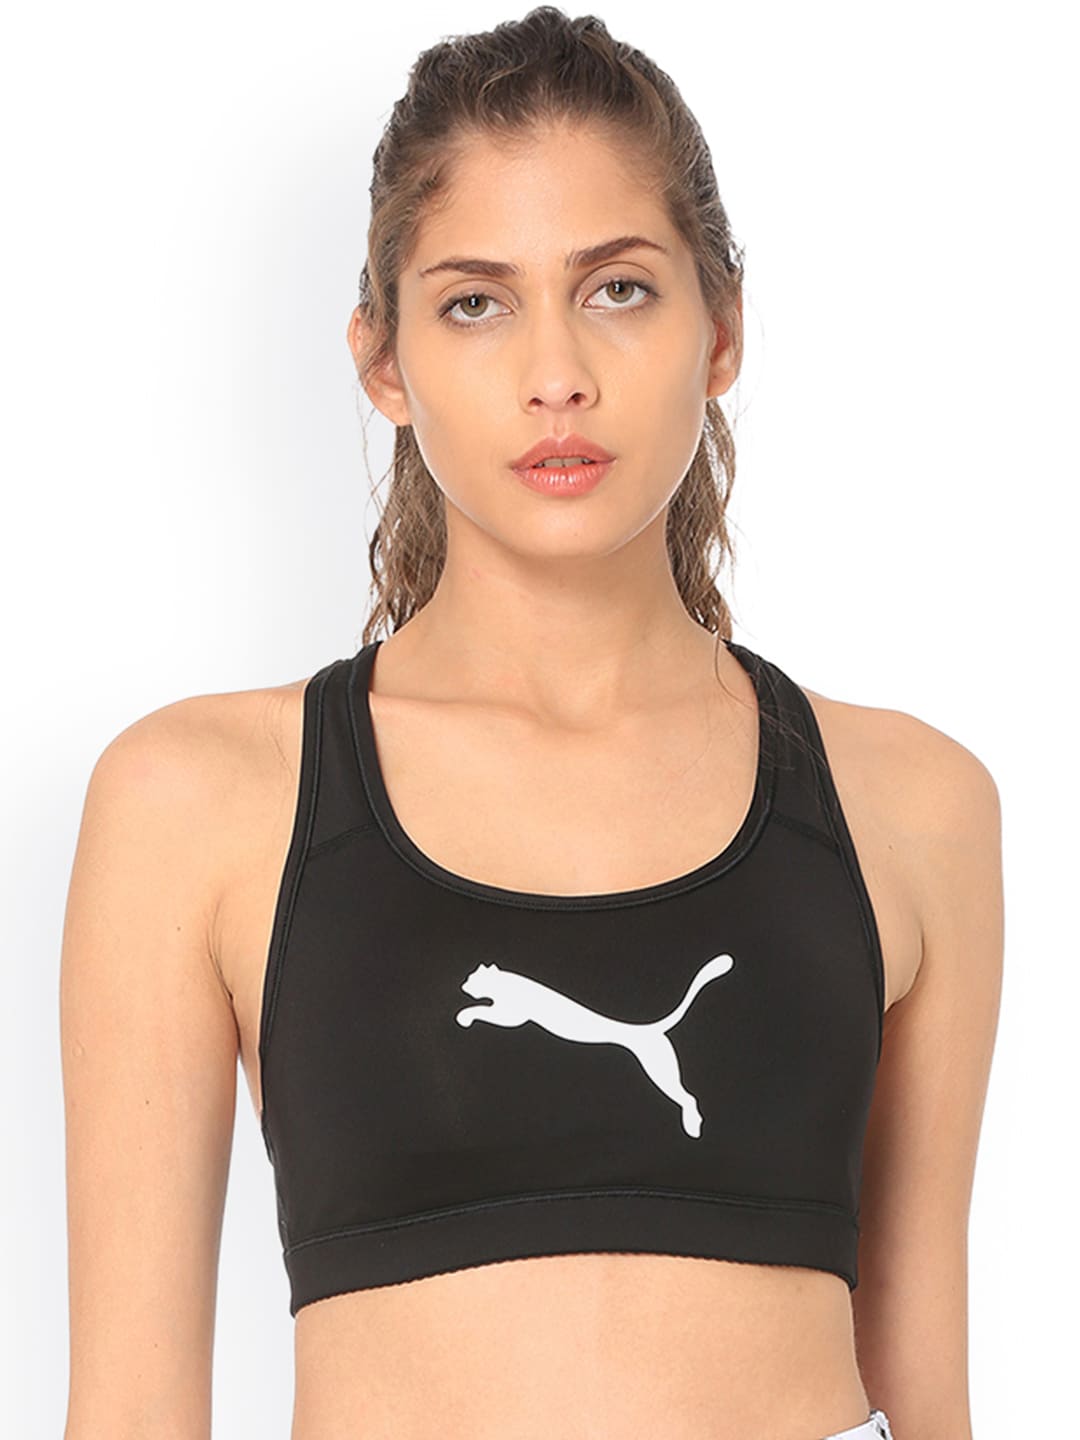 Puma Black Printed 4Keeps Bra PM Non-Wired Lightly Padded Sports Bra 51699801 Price in India